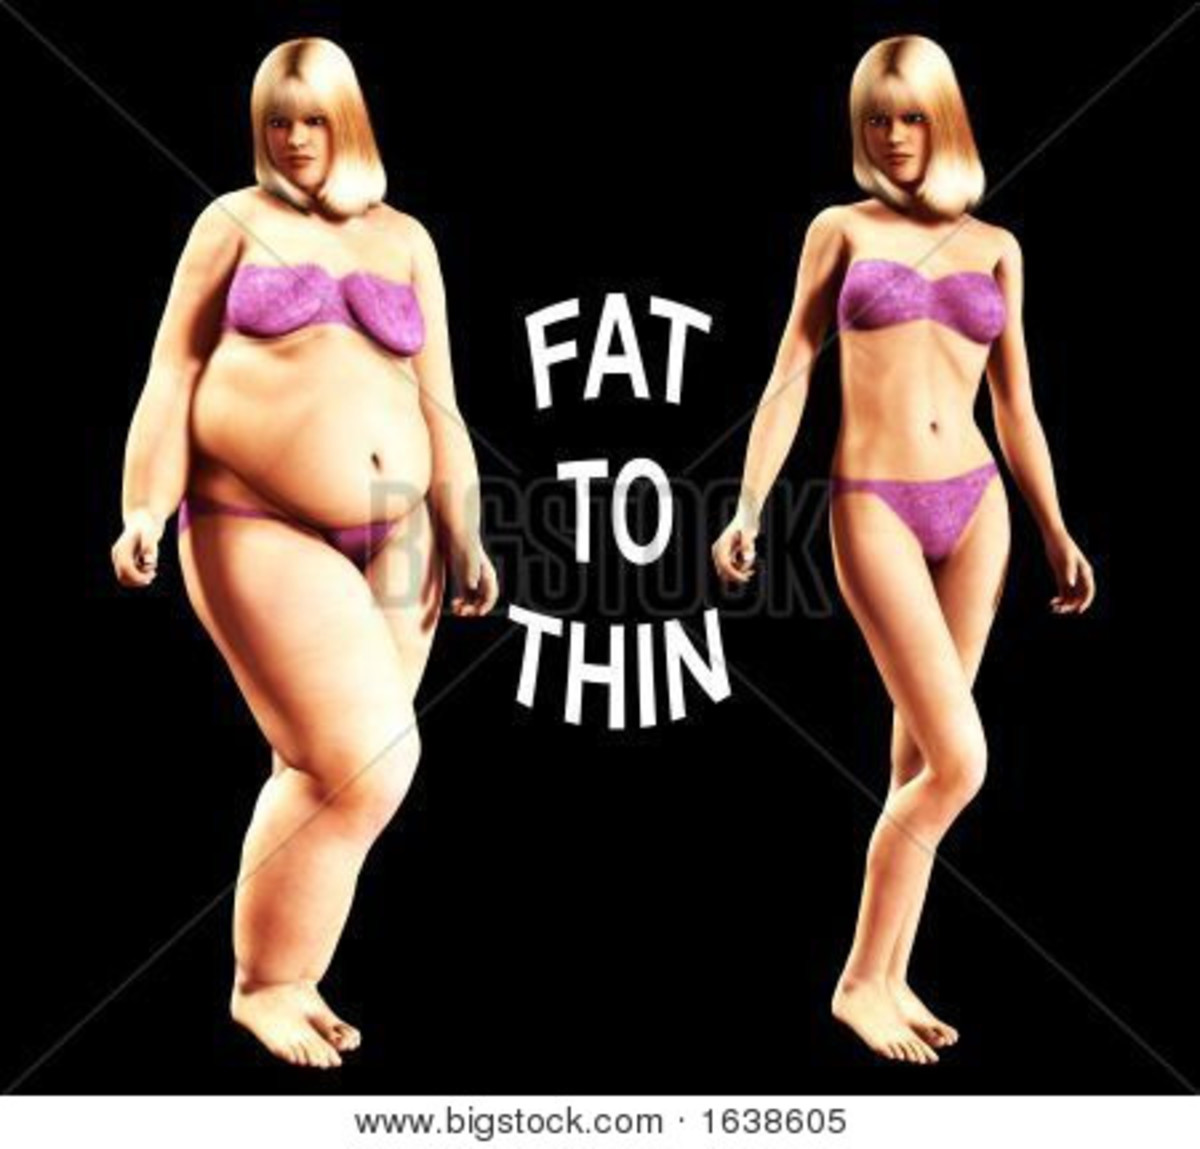 From Fat to Thin source bigstockphoto